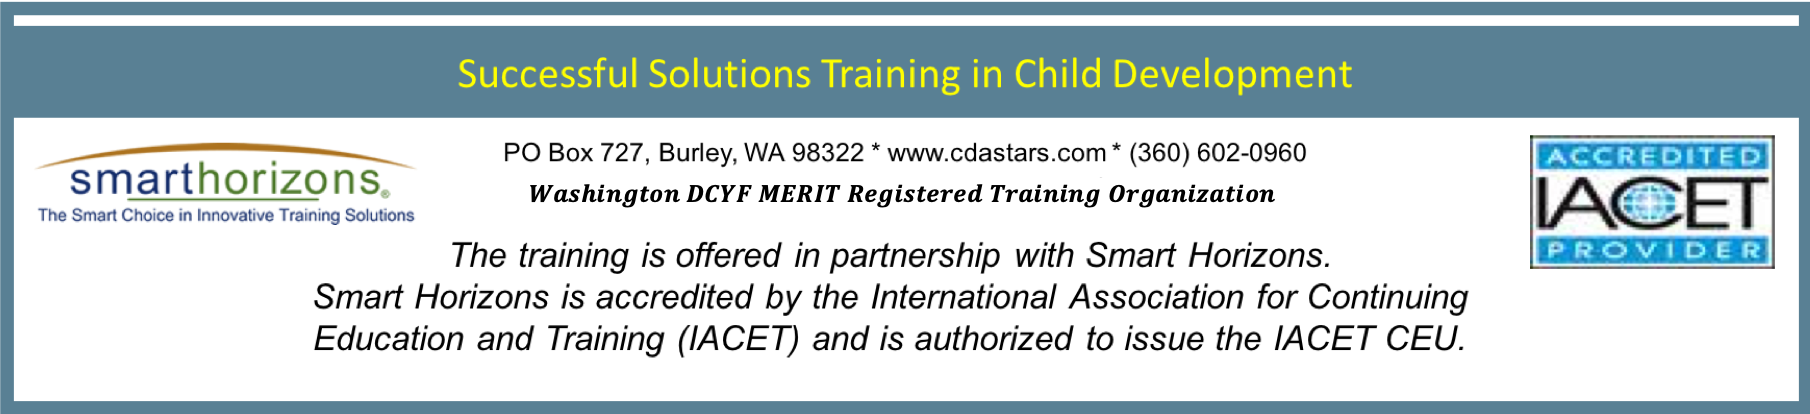 online certificate for daycare training